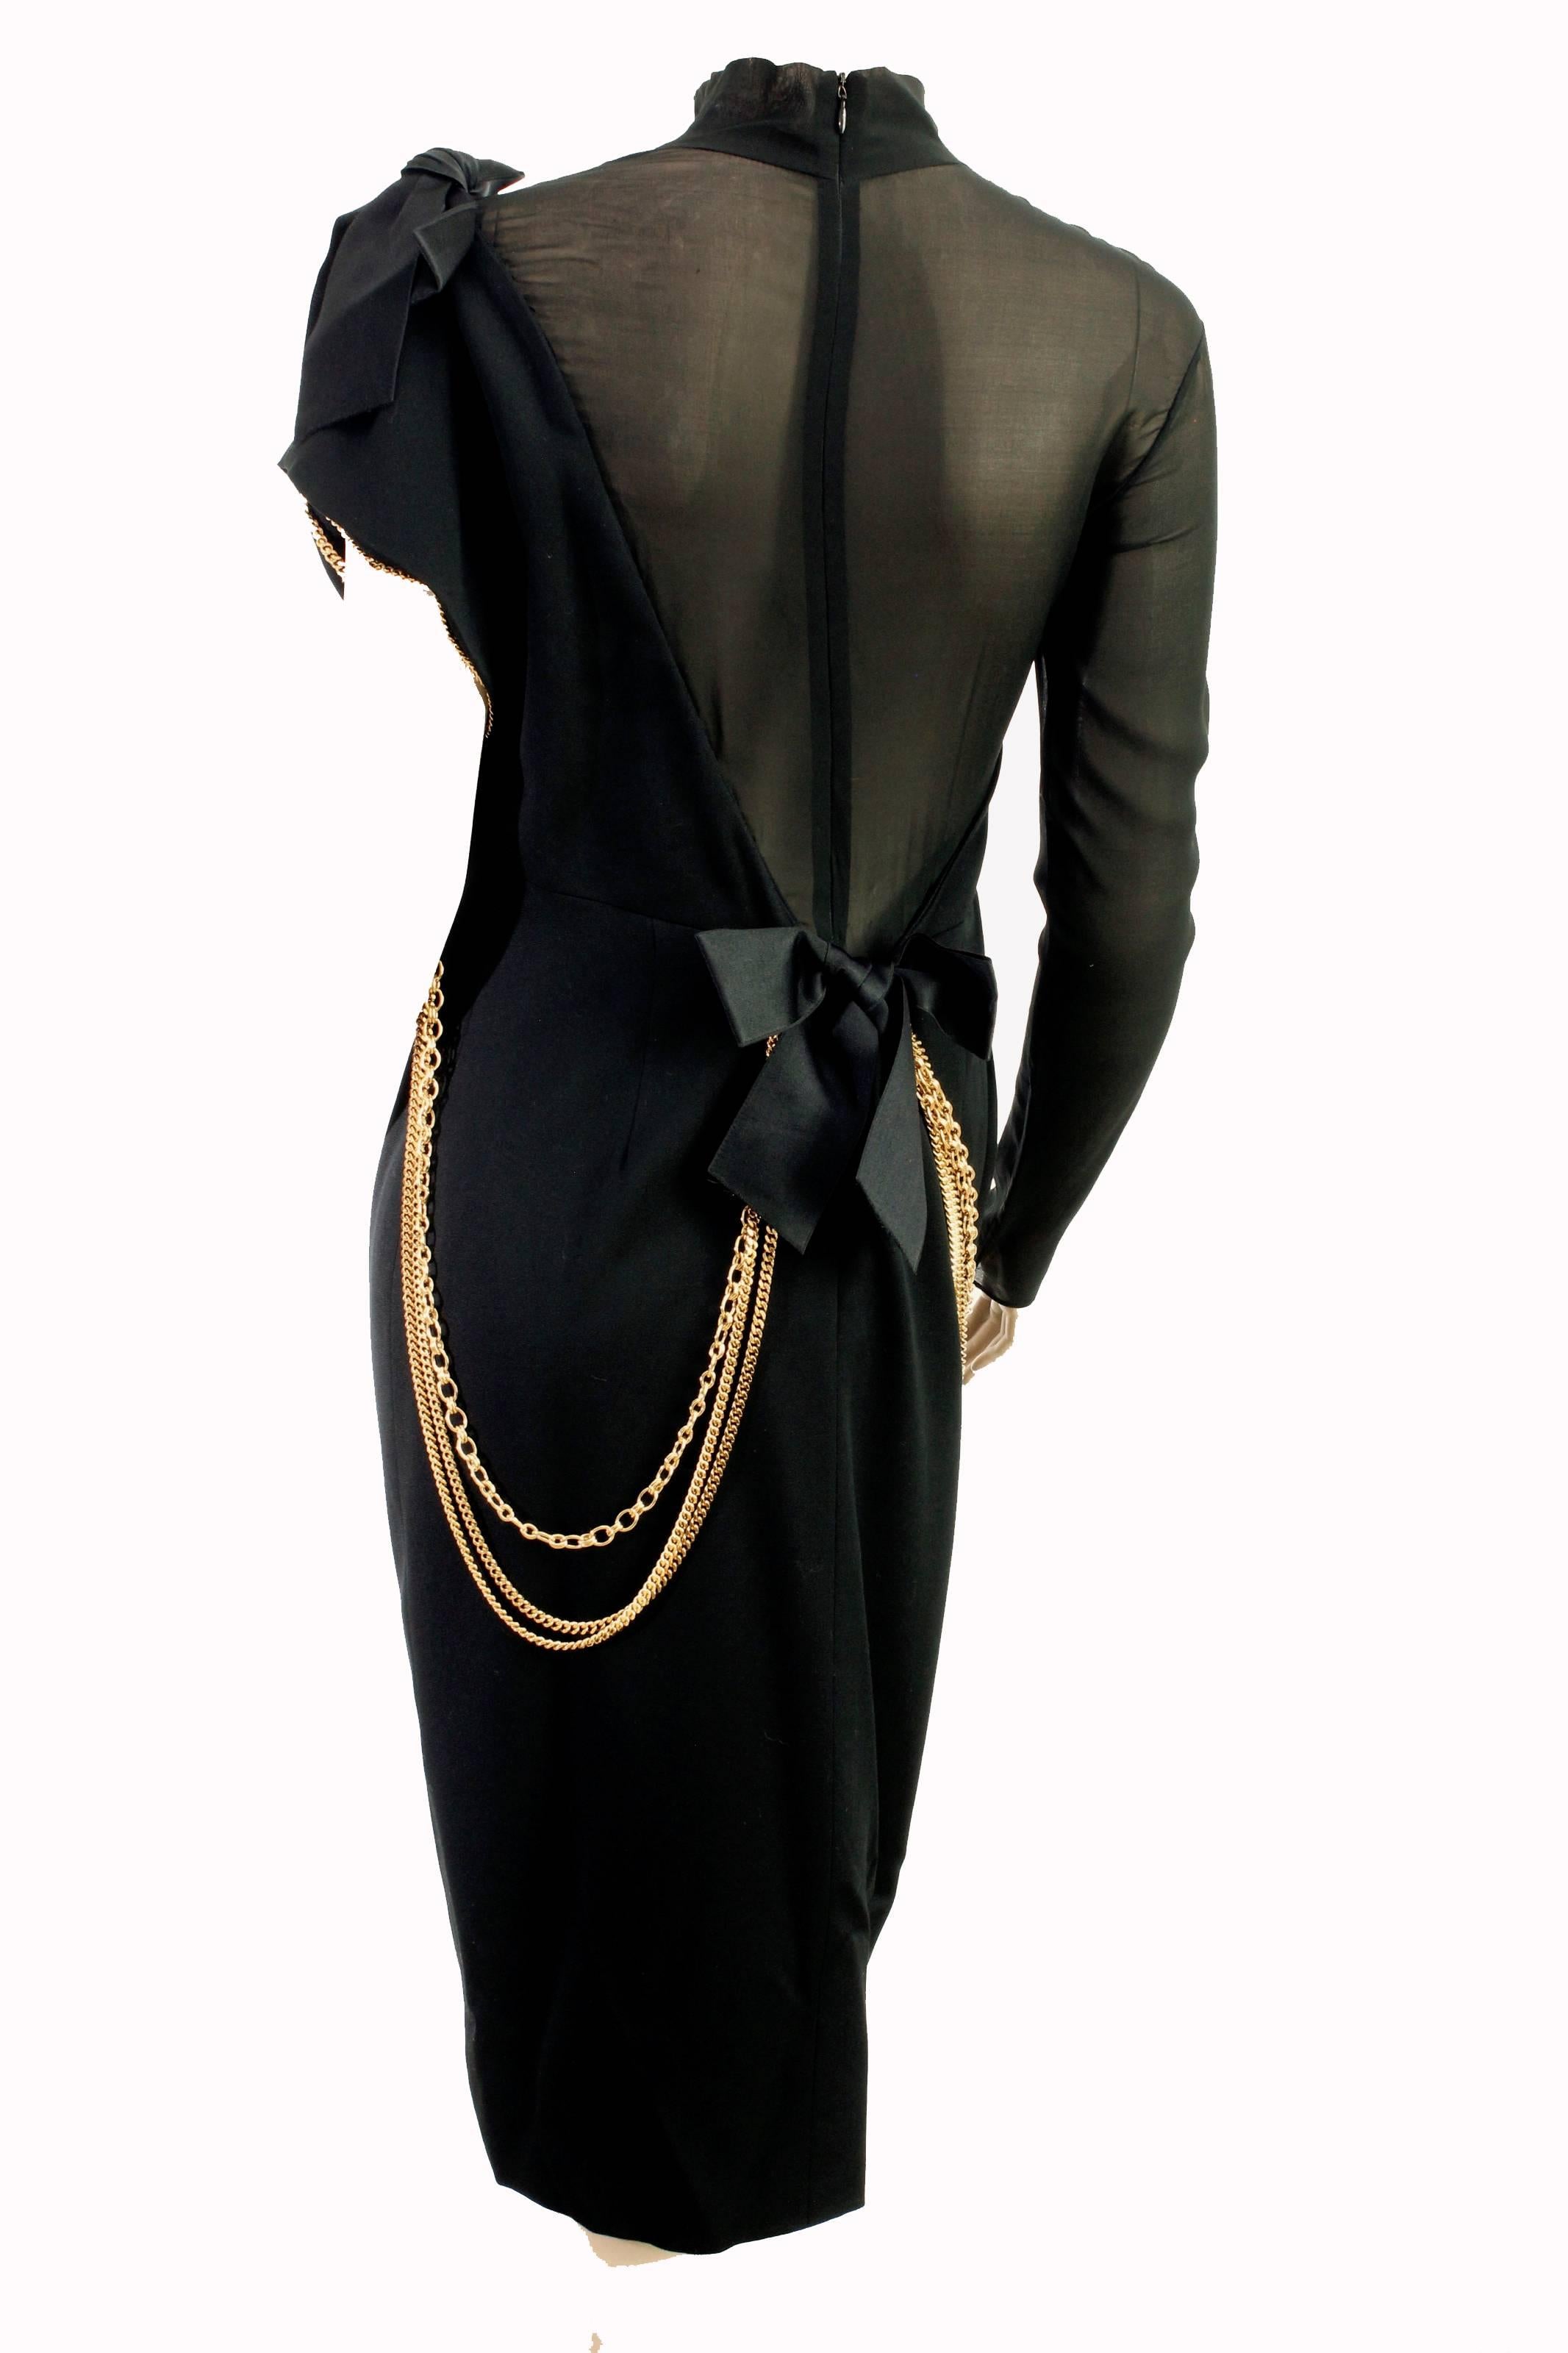 chanel black dress with chains